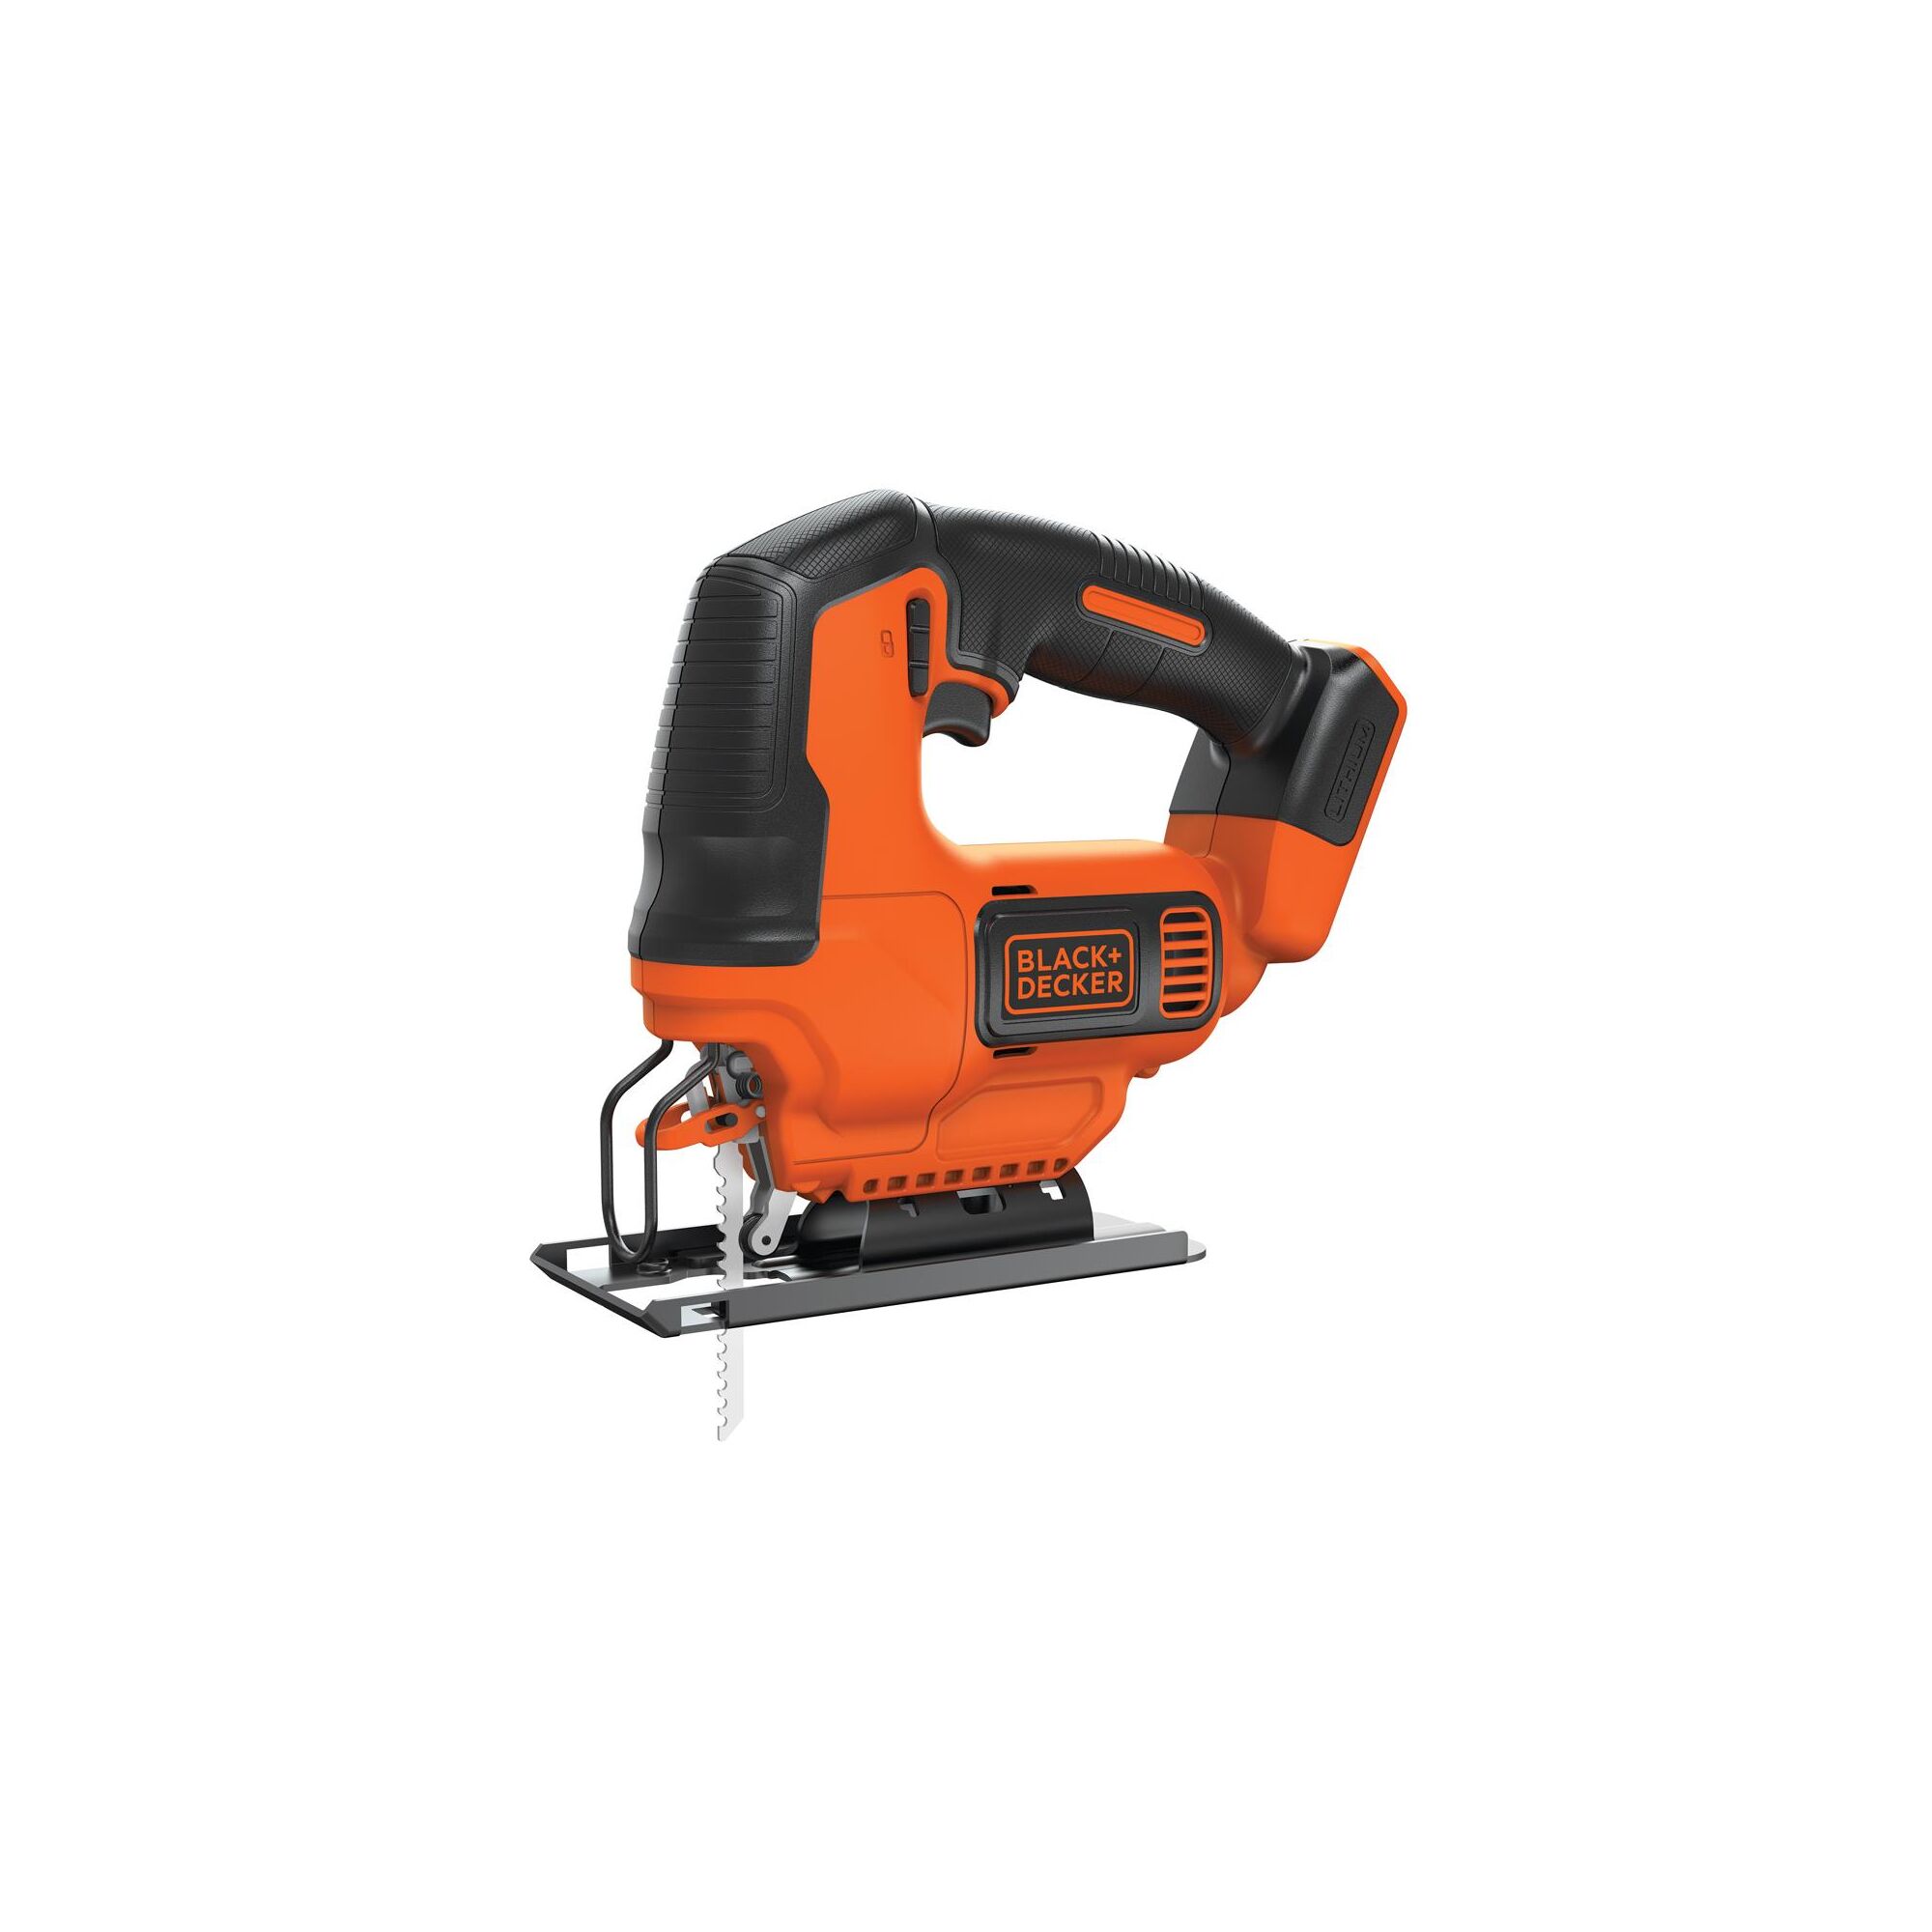 Profile of 20 volt cordless jigsaw, tool only